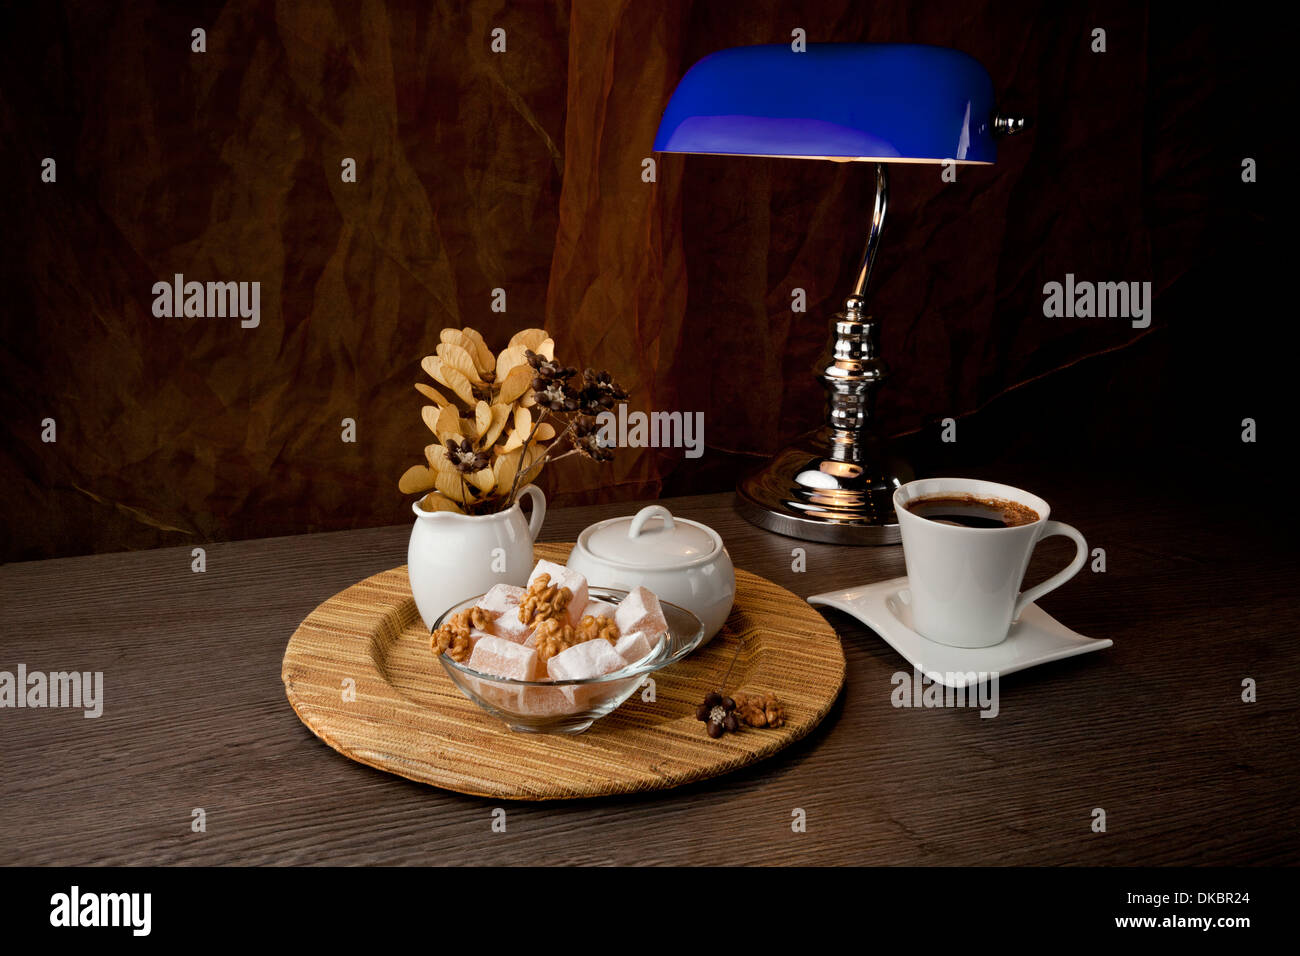 Turkish delight (lokum) confection with coffee pot Stock Photo